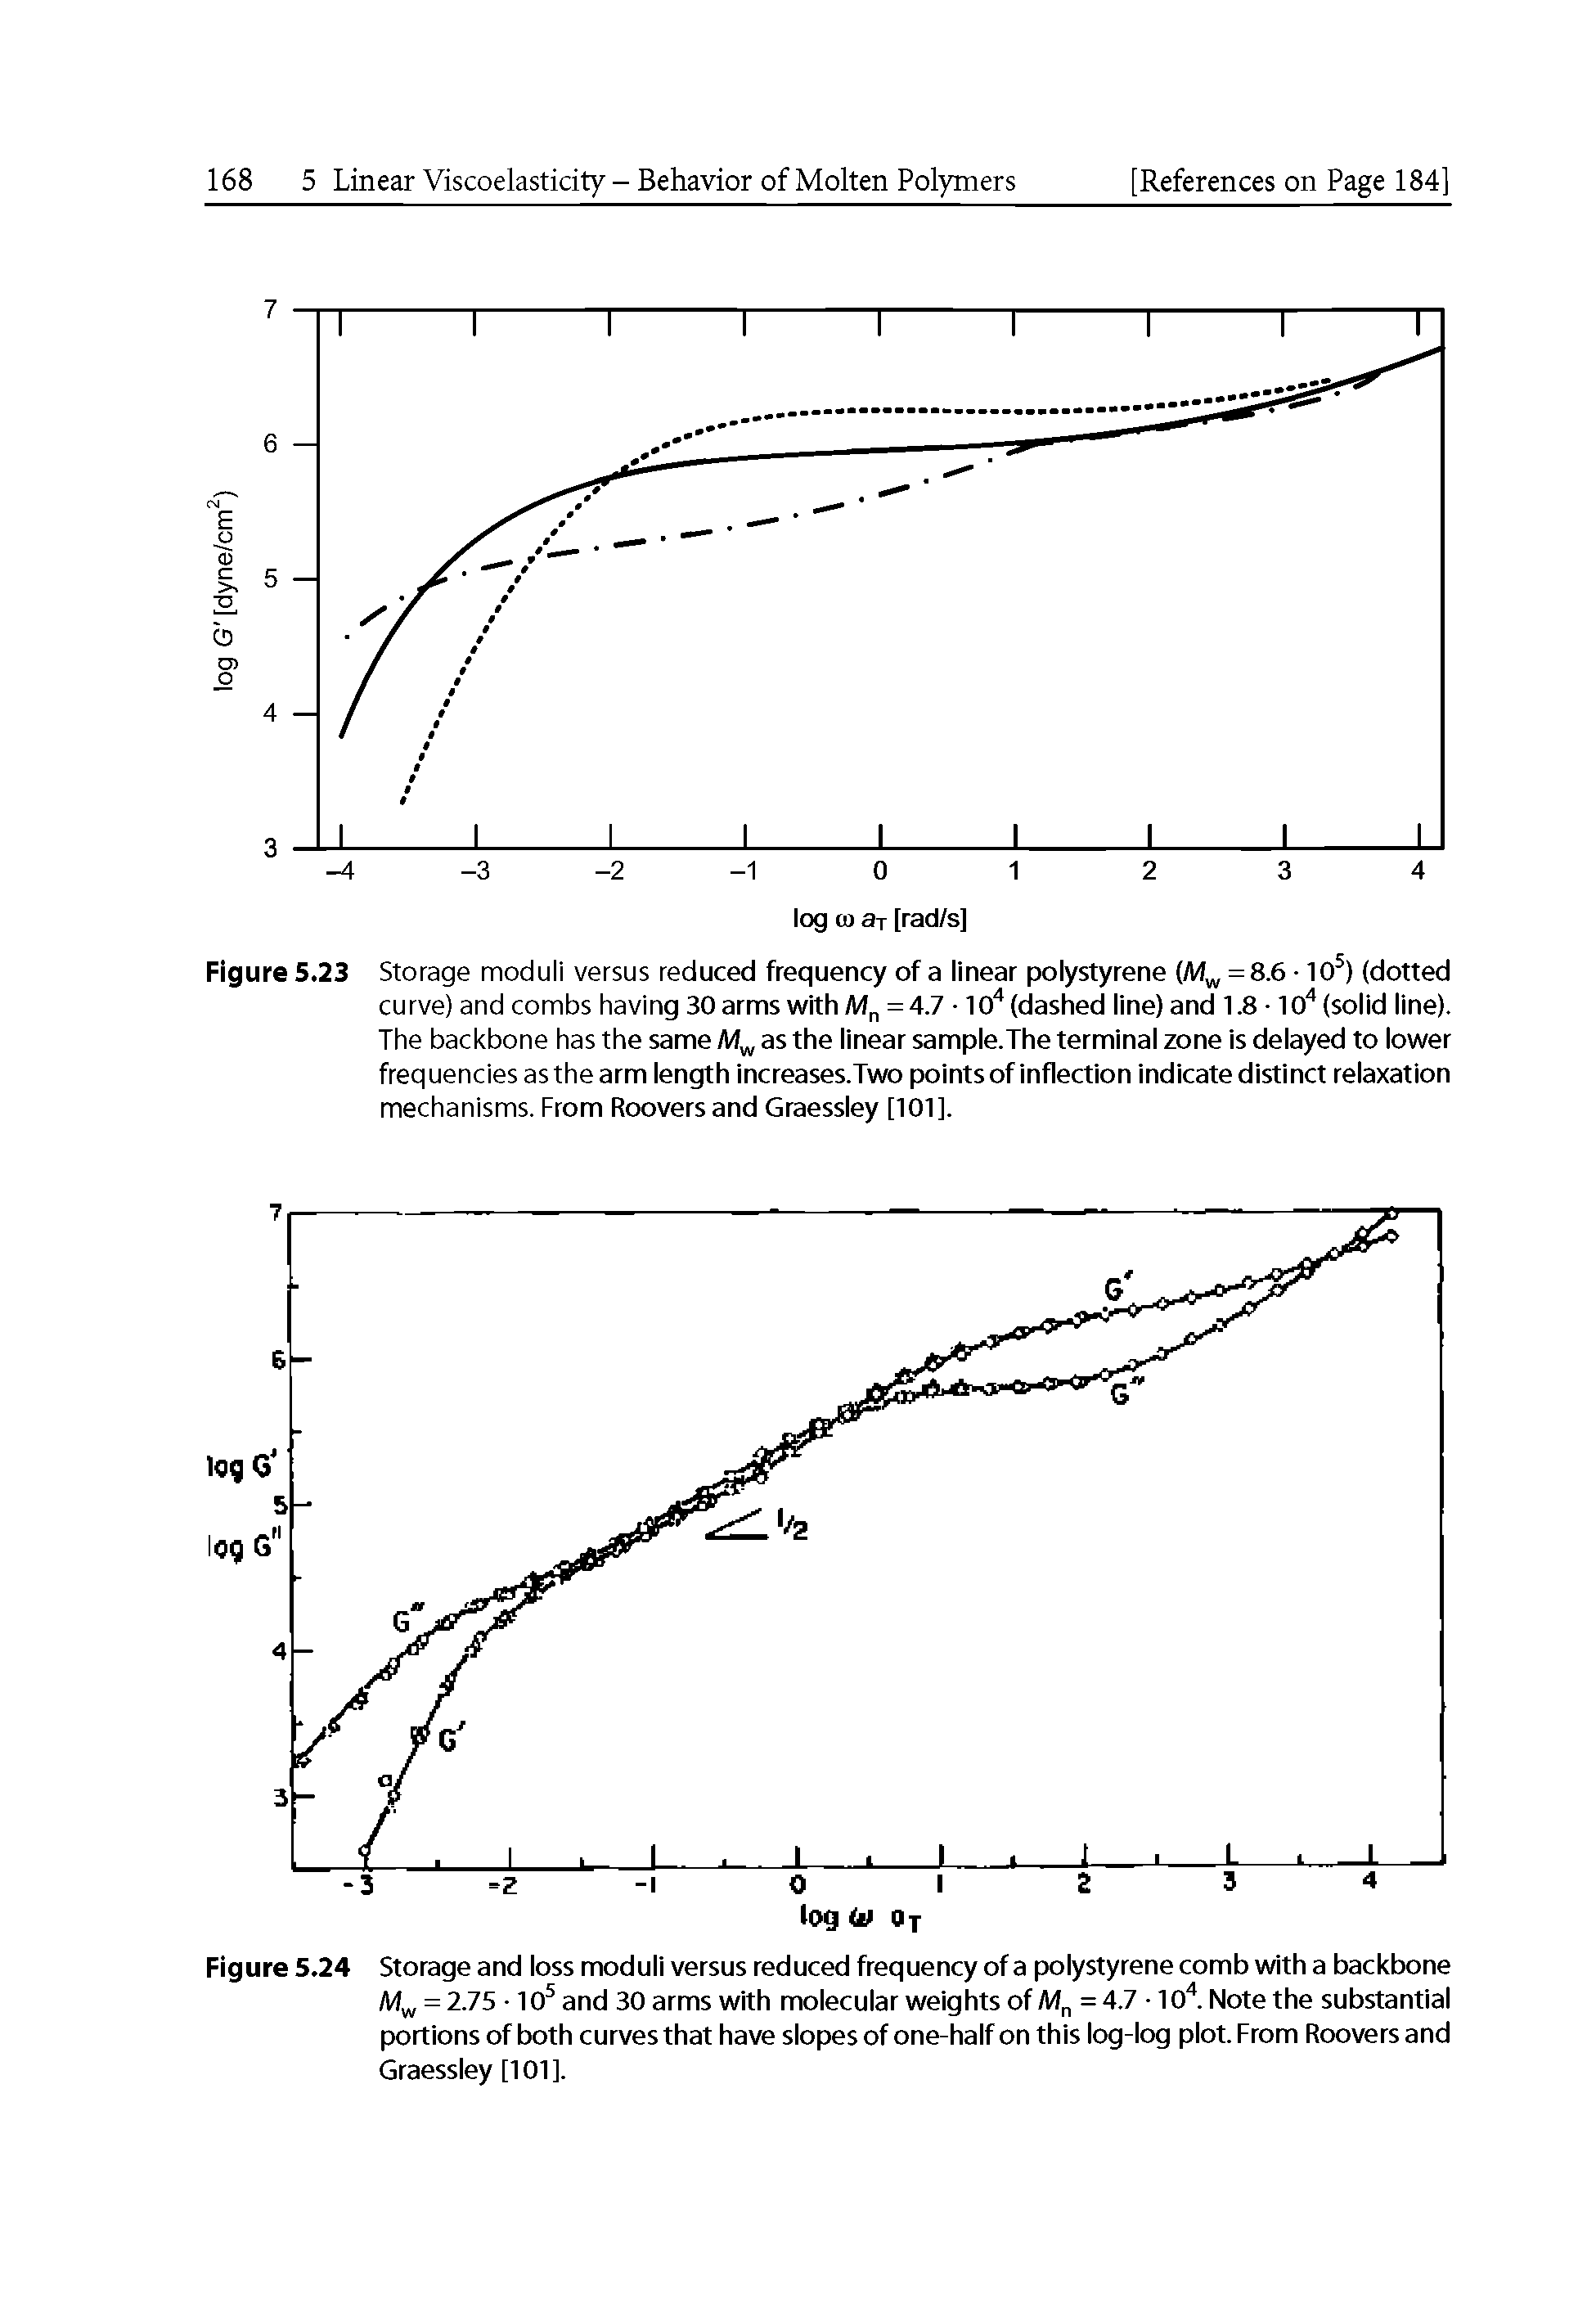 Figure 5.24 Storage and loss moduli versus reduced frequency of a polystyrene comb with a backbone = 2.75 10 and 30 arms with molecular weights of =4.7-10. Note the substantial portions of both curves that have slopes of one-half on this log-log plot. From Roovers and Graessley [101 ].